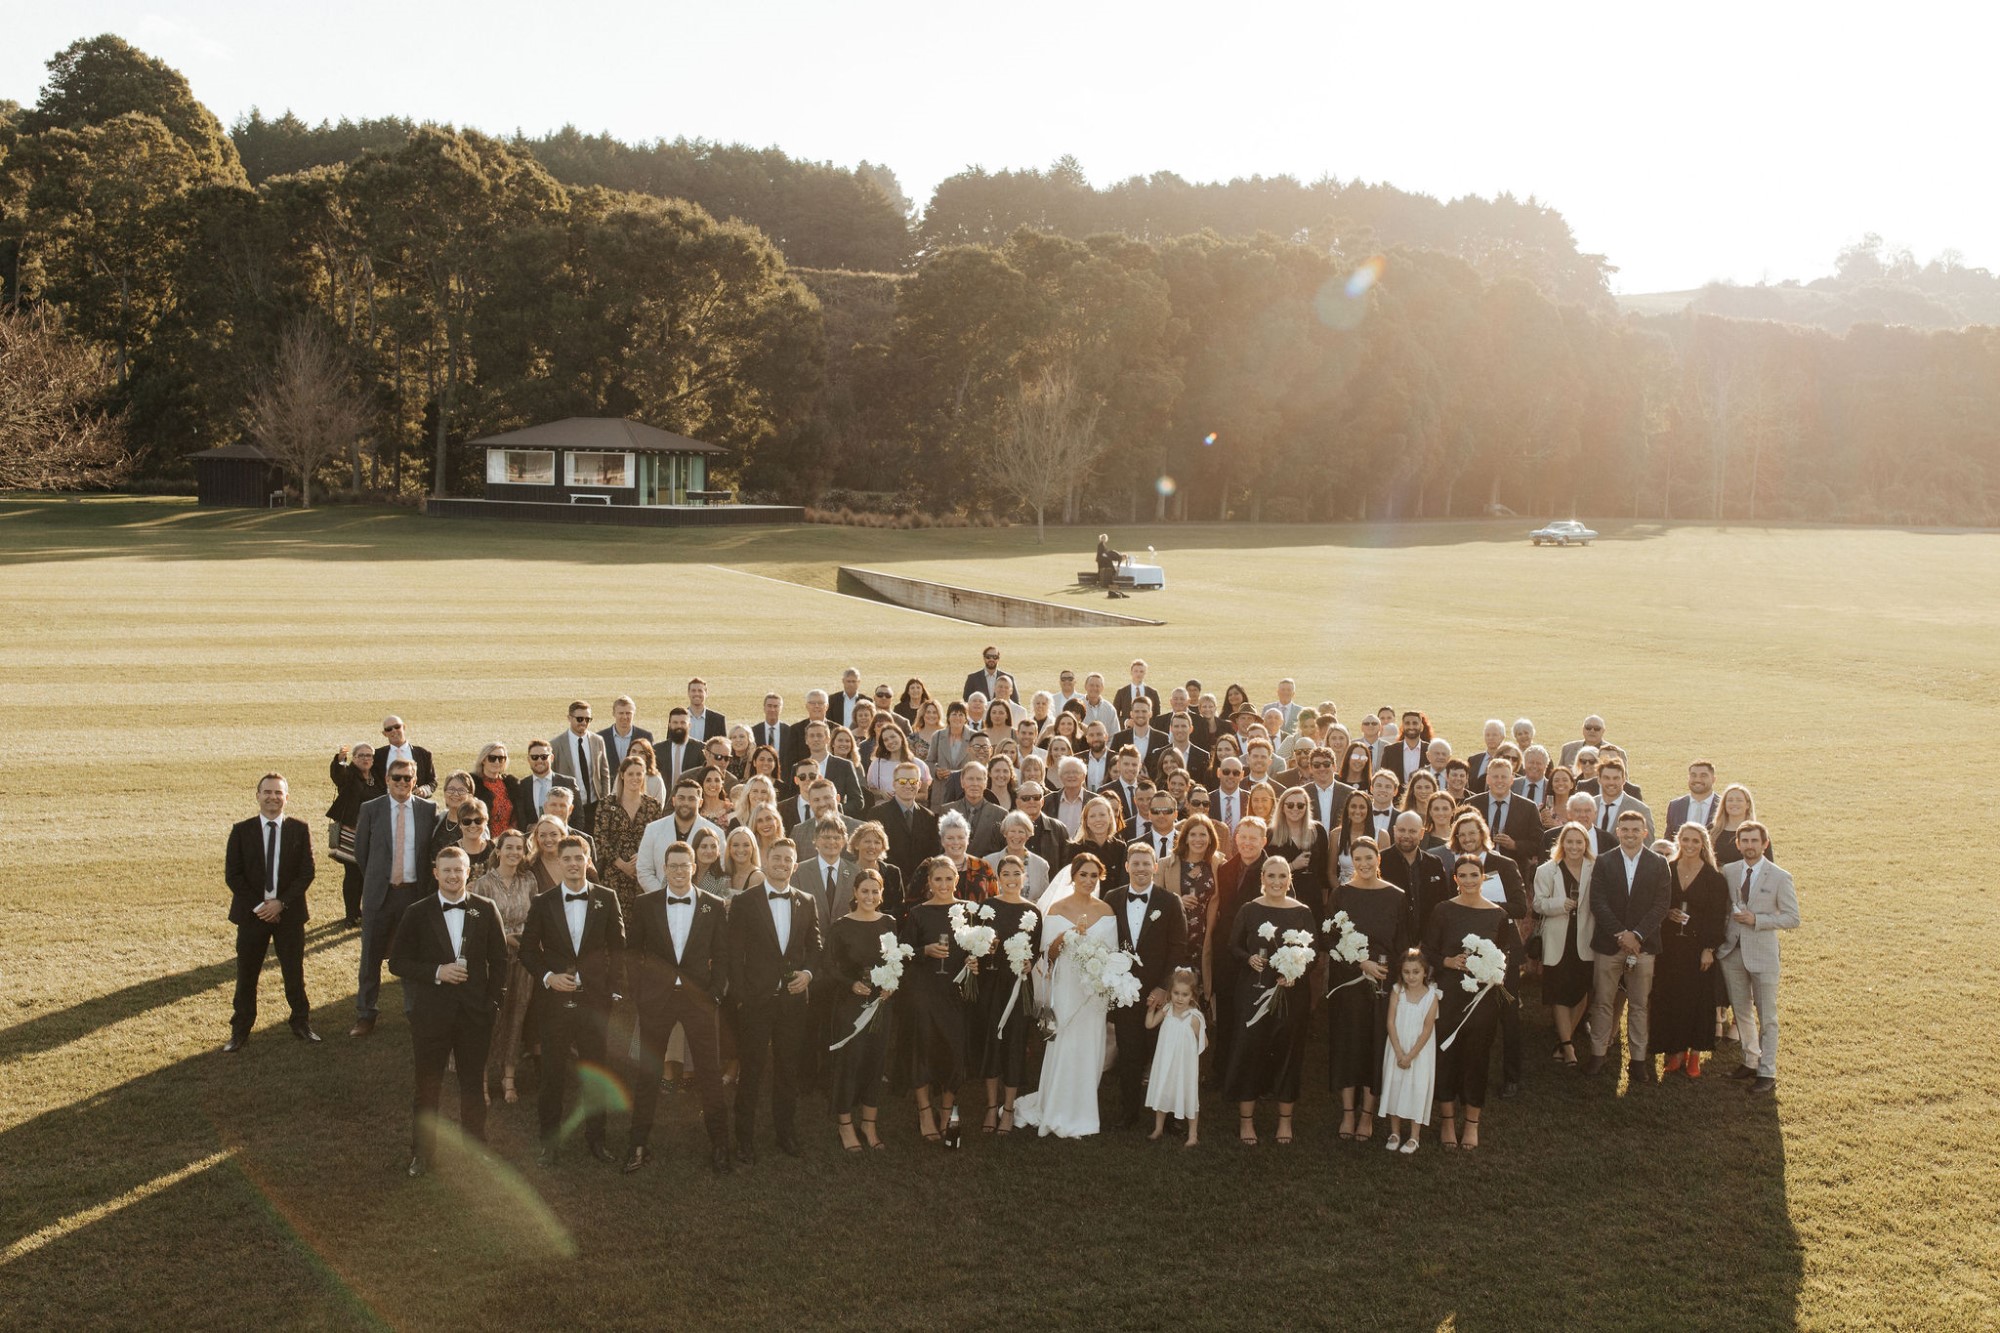 Drone shot capturing crowd of wedding guests posing for photo.